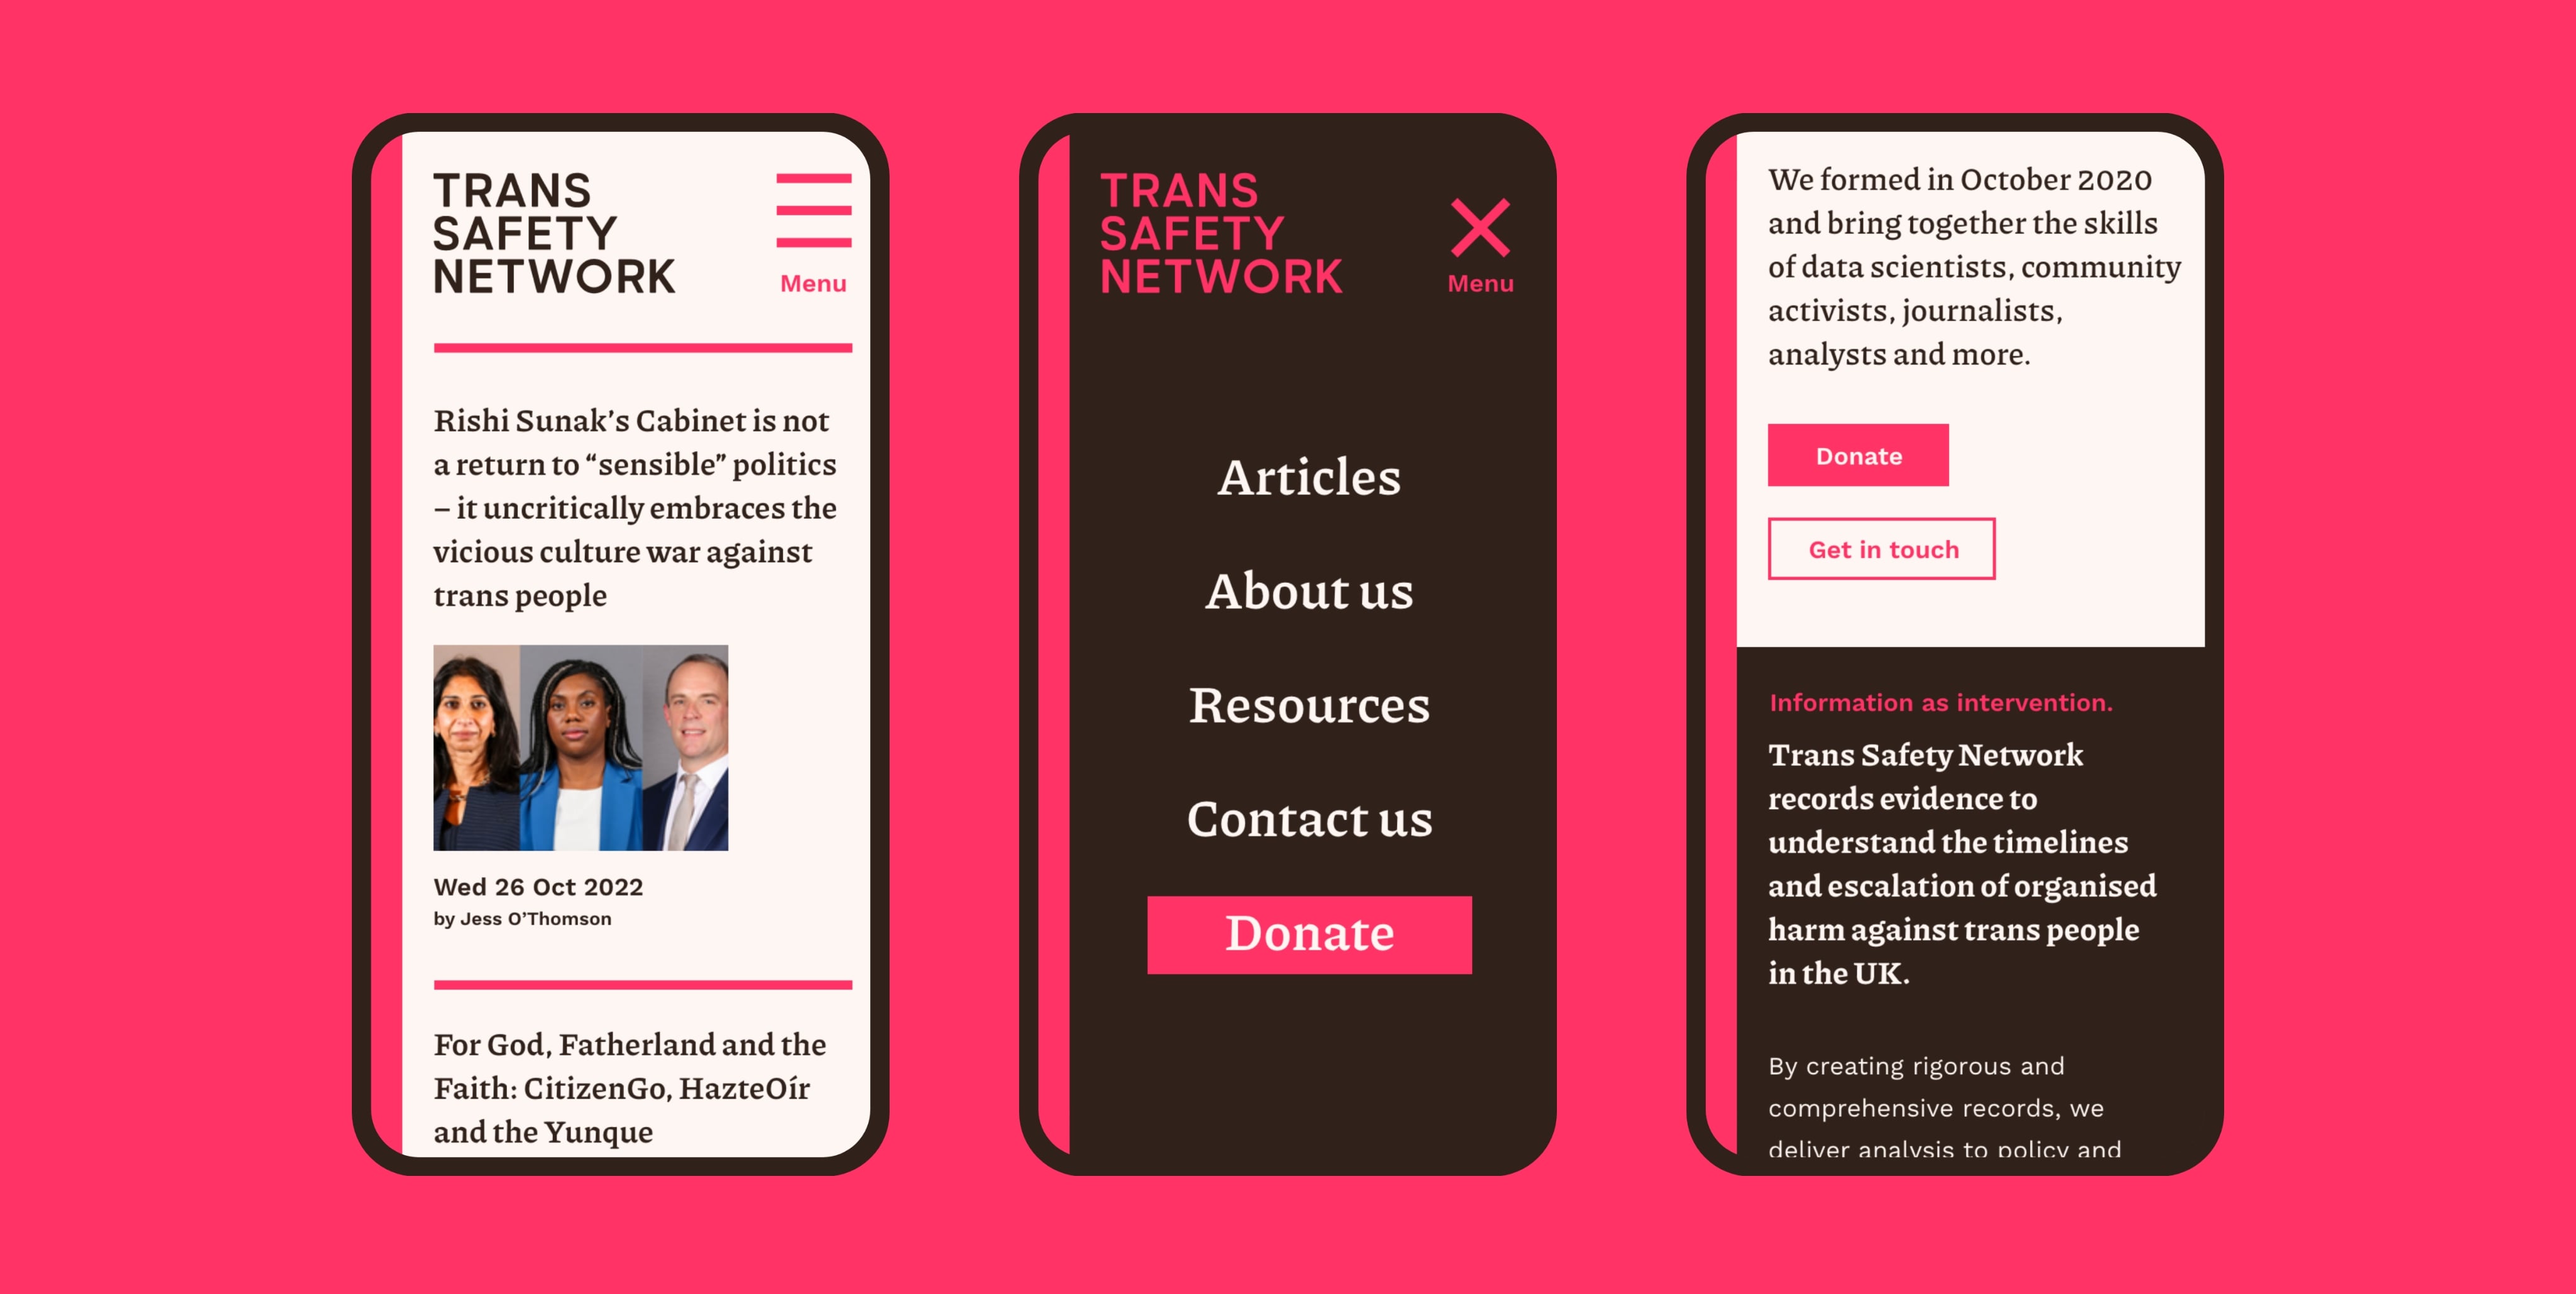 A split image showing three screenshots of the Trans Safety Network website at mobile size on a pink background